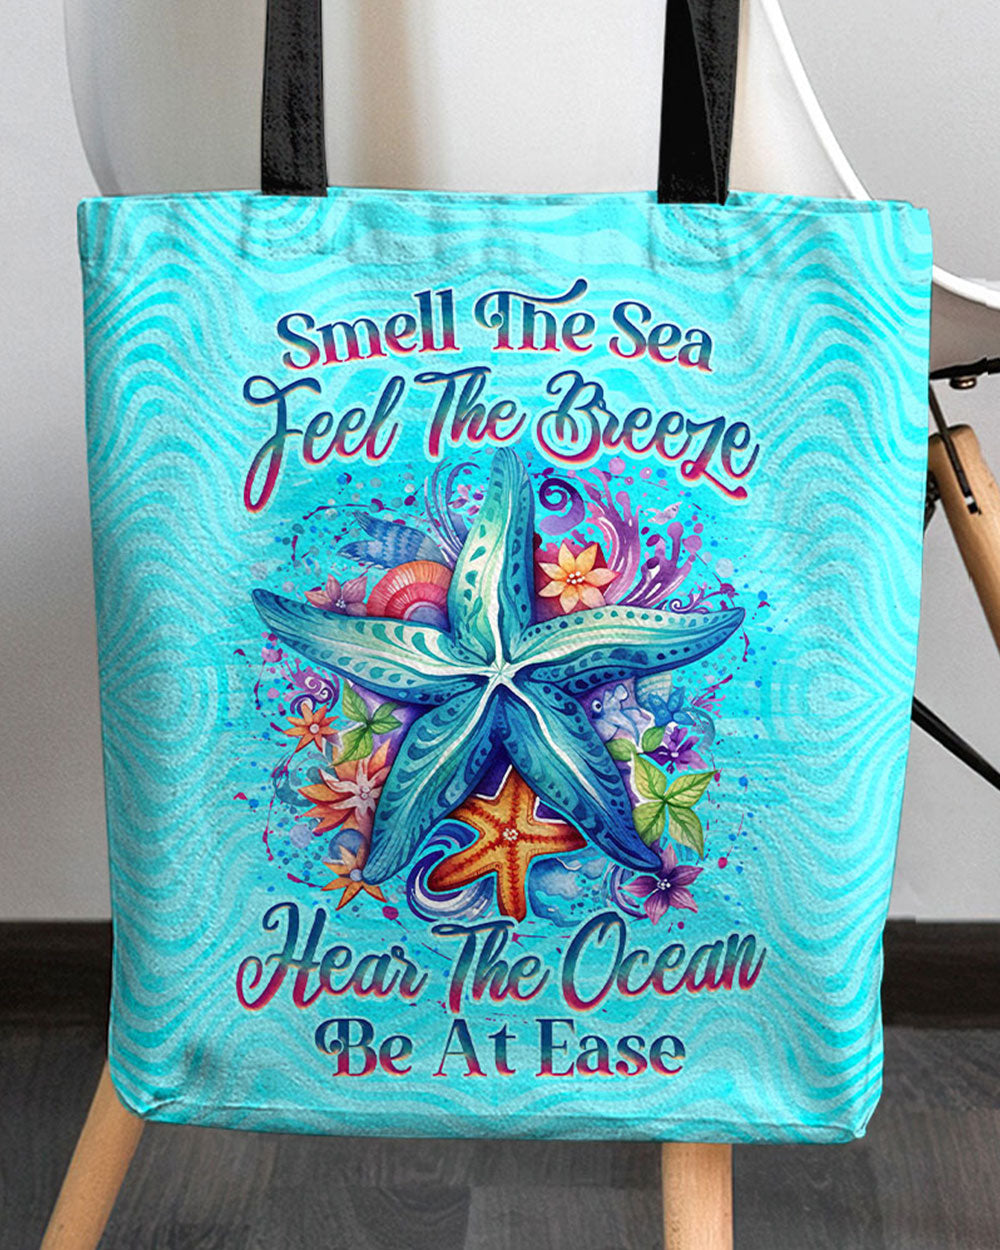 SMELL THE SEA FEEL THE BREEZE STARFISH TOTE BAG - YHLN1007233